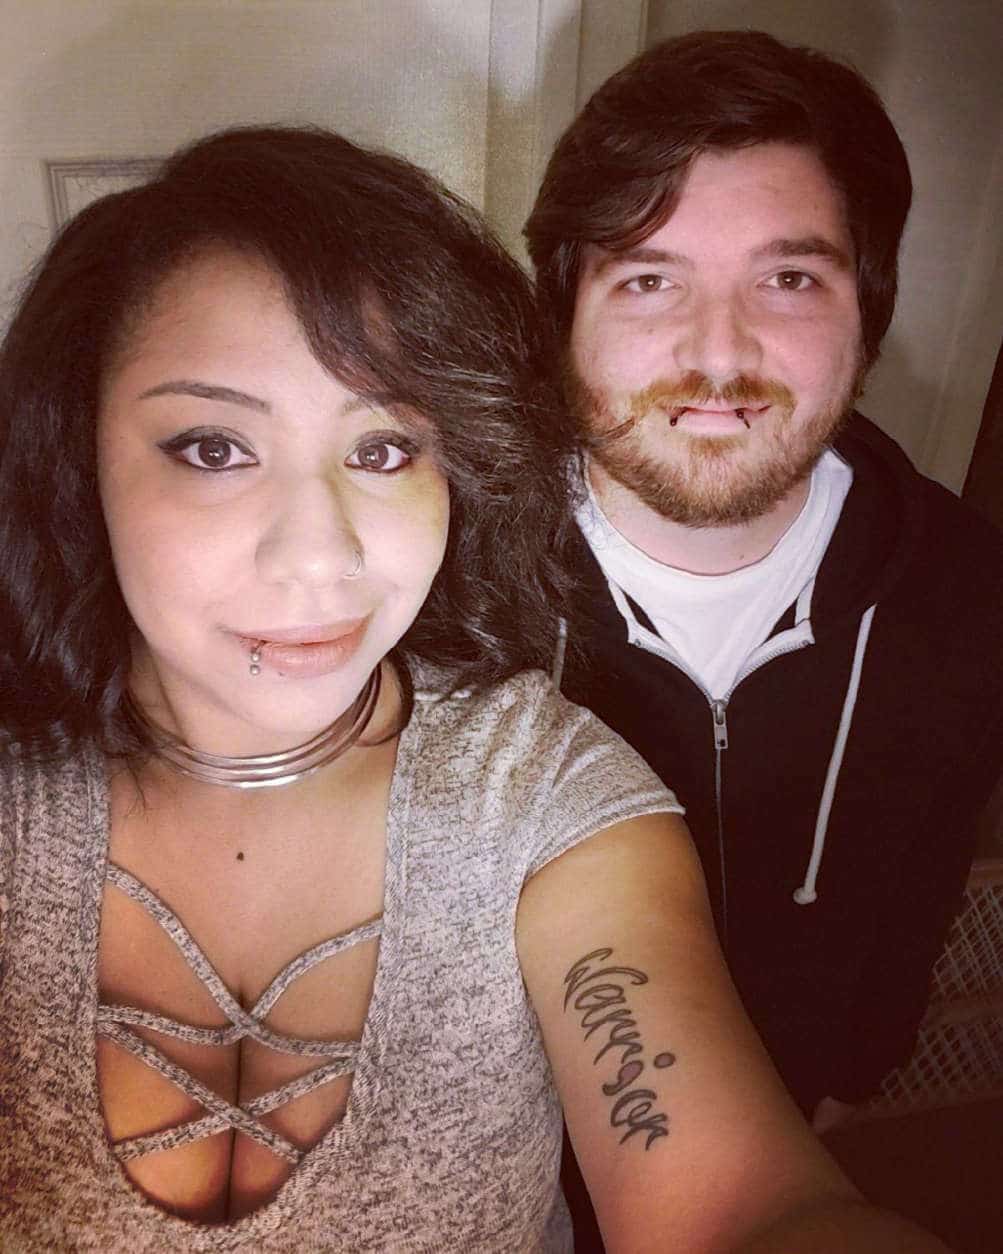 Brittany Young and Josh Landry of Richmond, Va., said that the Lovings ordeal still resonates with them as an interracial couple, more than 50 years after the case was decided. (Courtesy Capital News Service)